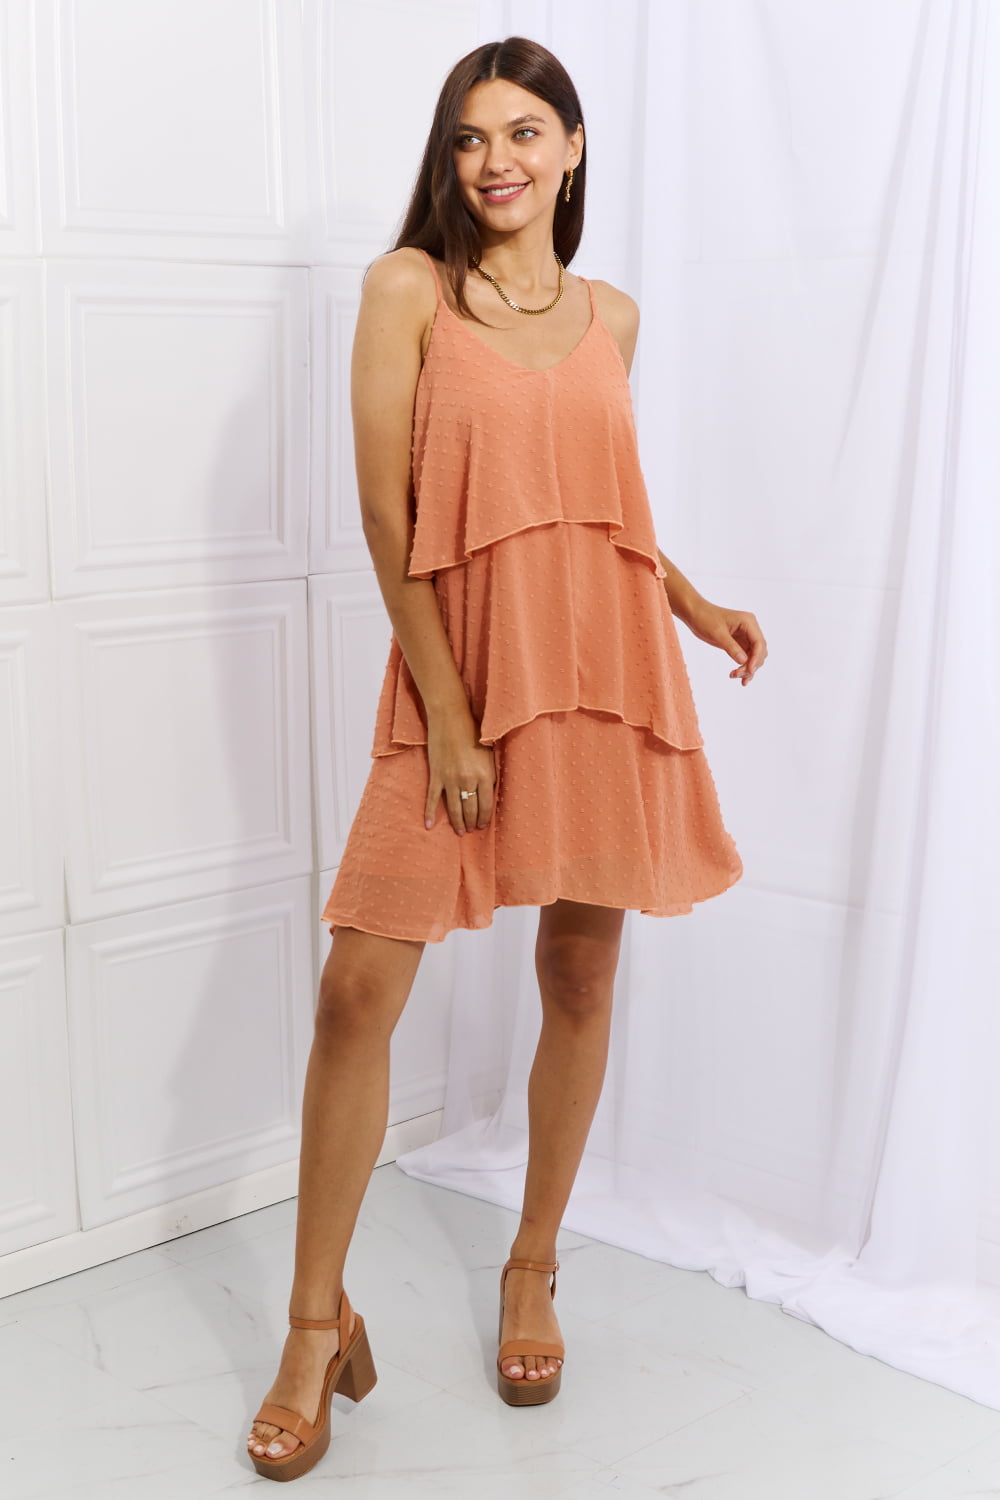 Culture Code By The River Full Size Cascade Ruffle Style Cami Dress in Sherbet | Dress - CHANELIA